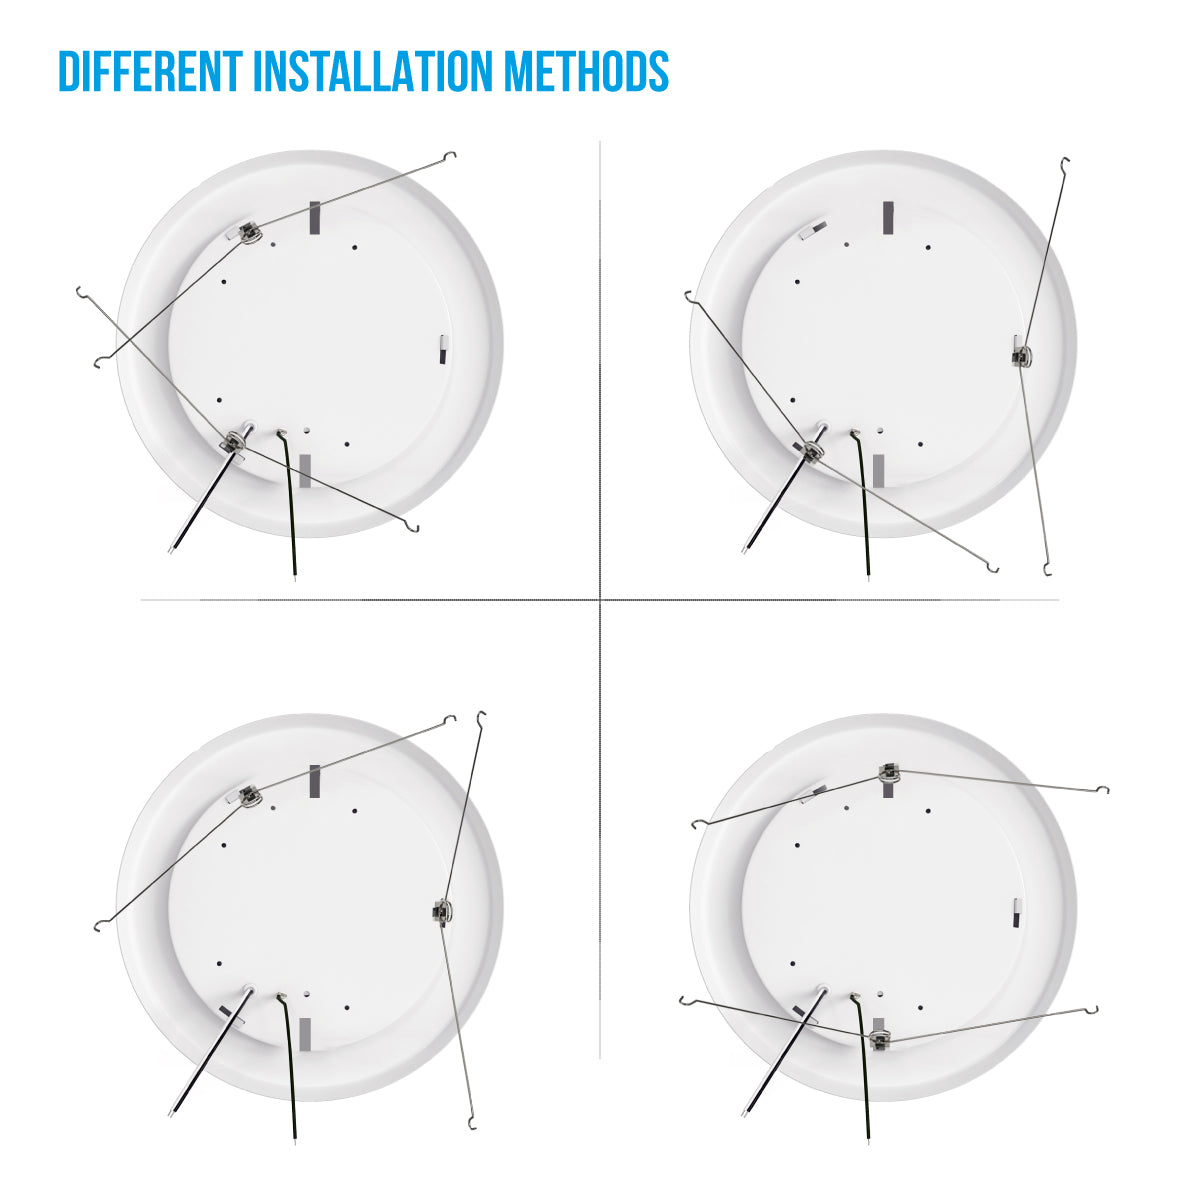 5-6-inch-dimmable-led-disk-downlights-15w